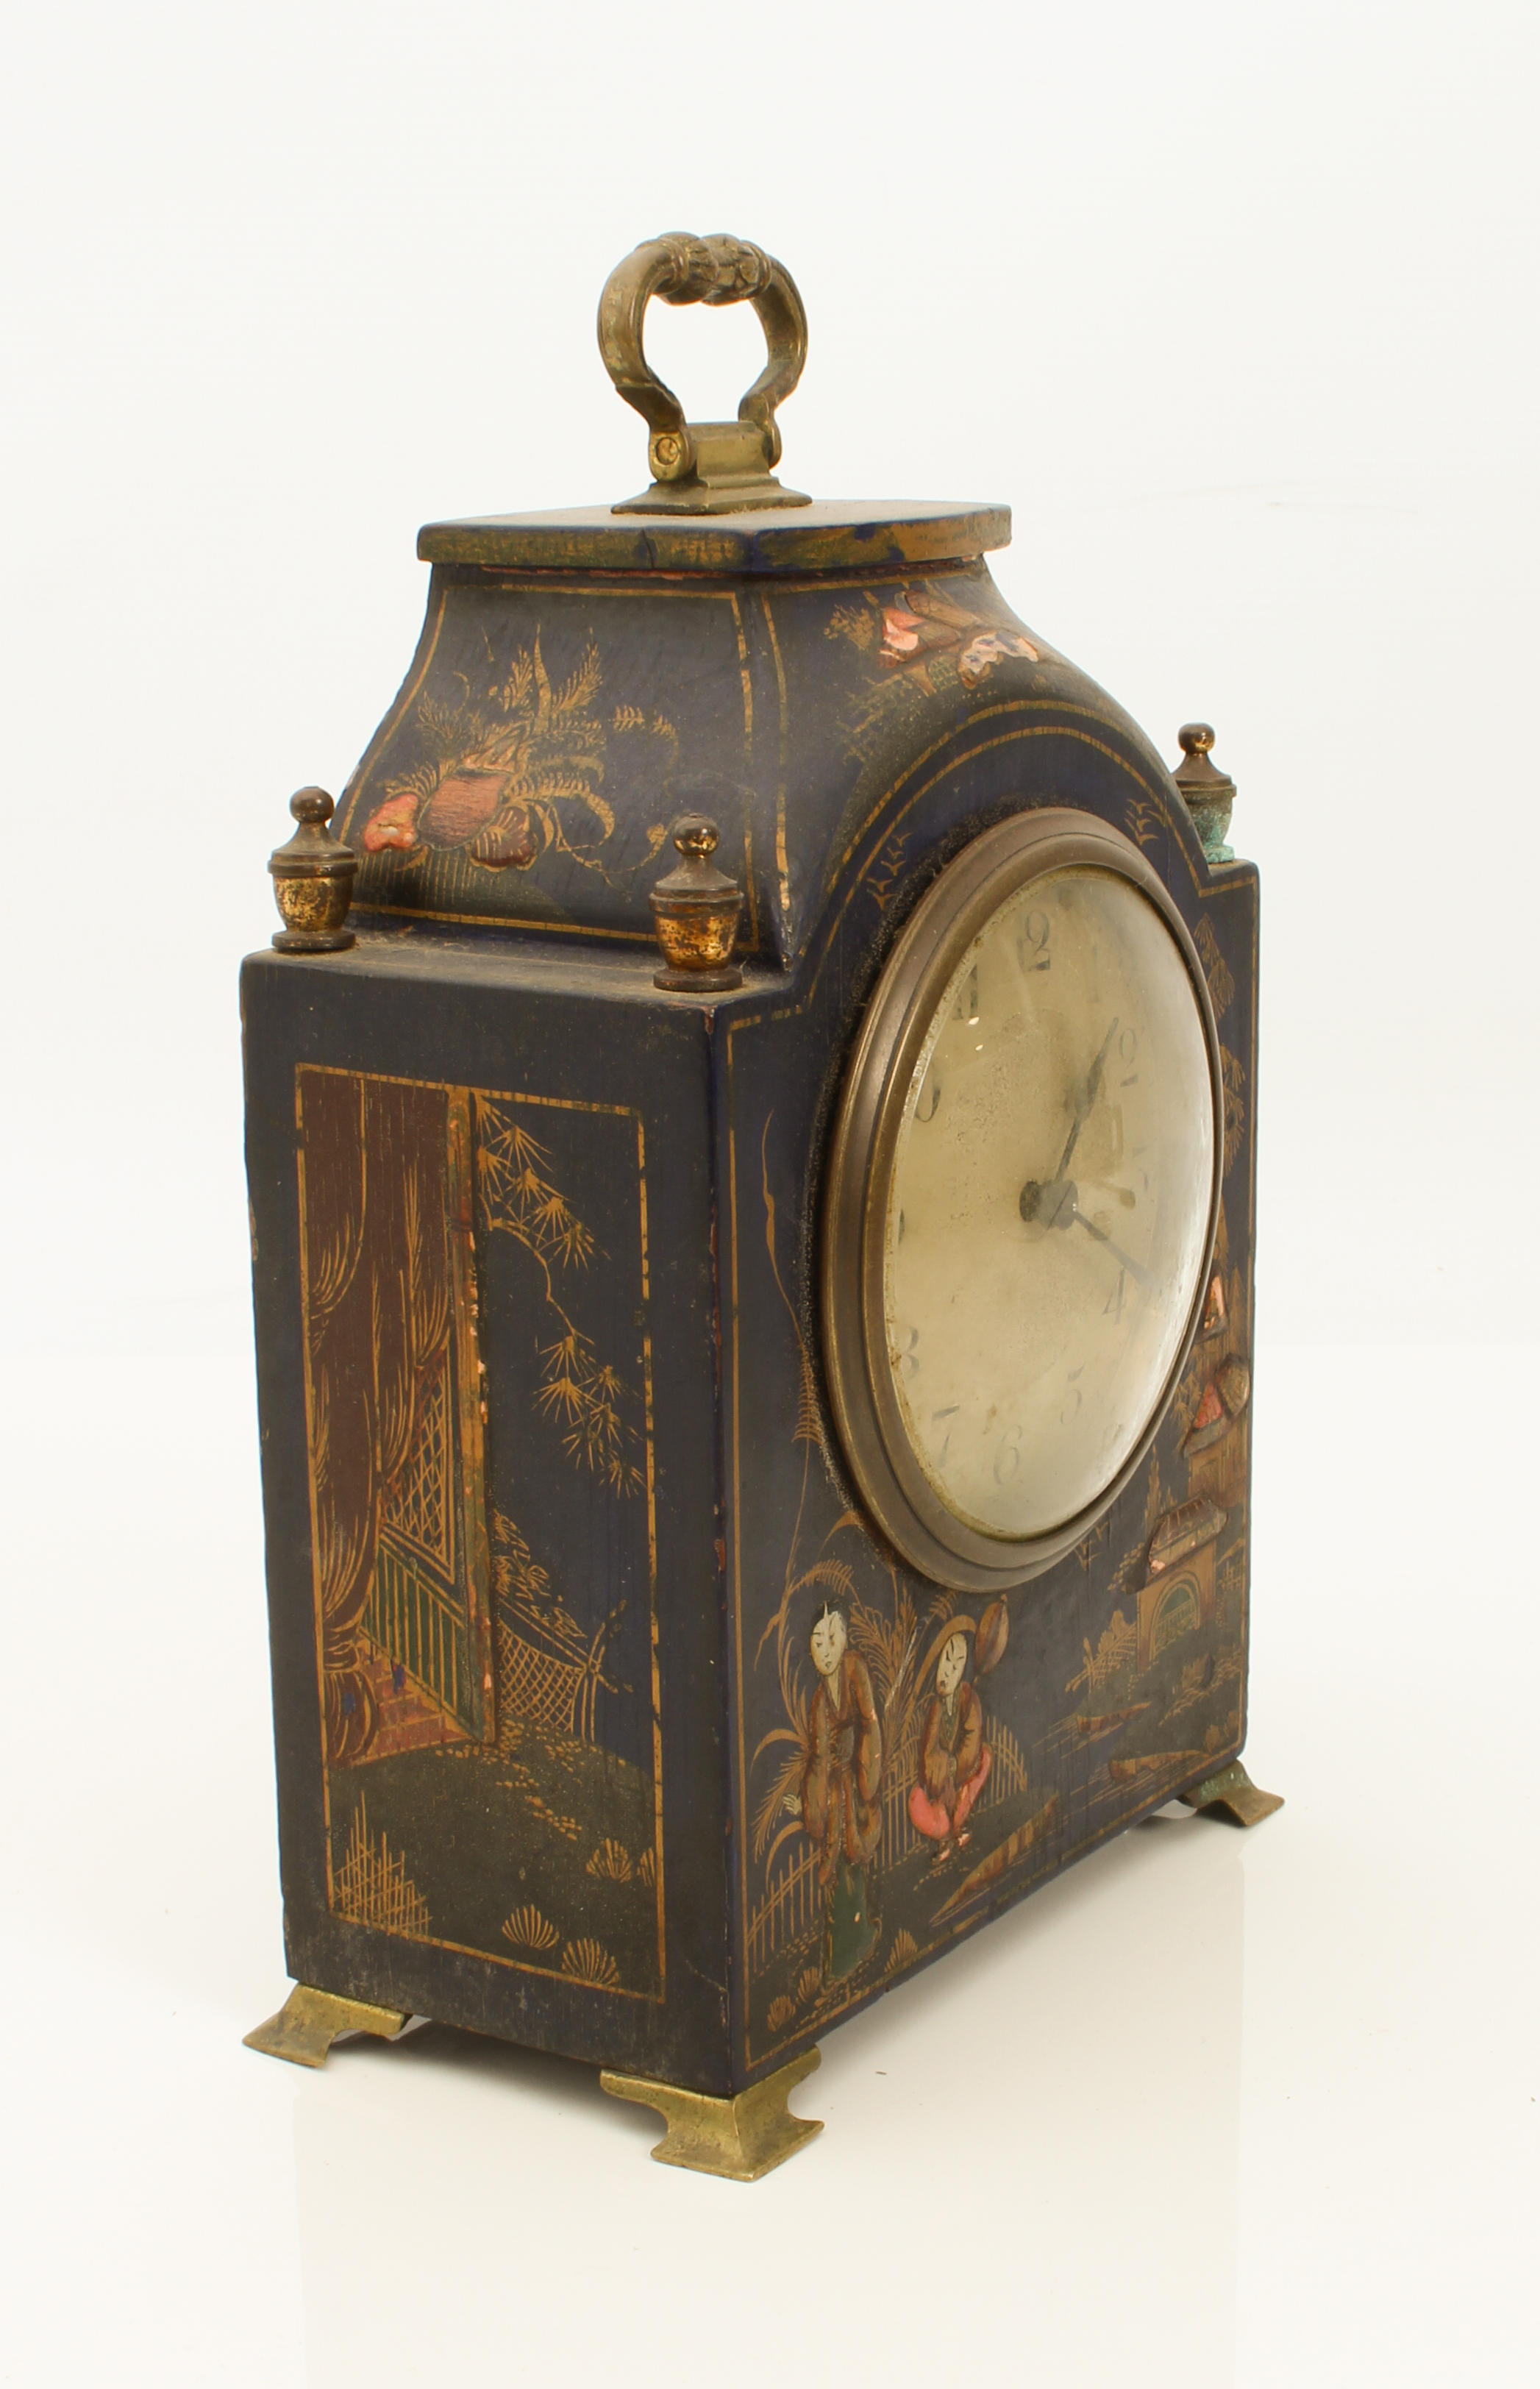 A brass-mounted desk or mantel clock in the Chinoiserie style - late-19th century, silvered 3¼ in - Image 3 of 10